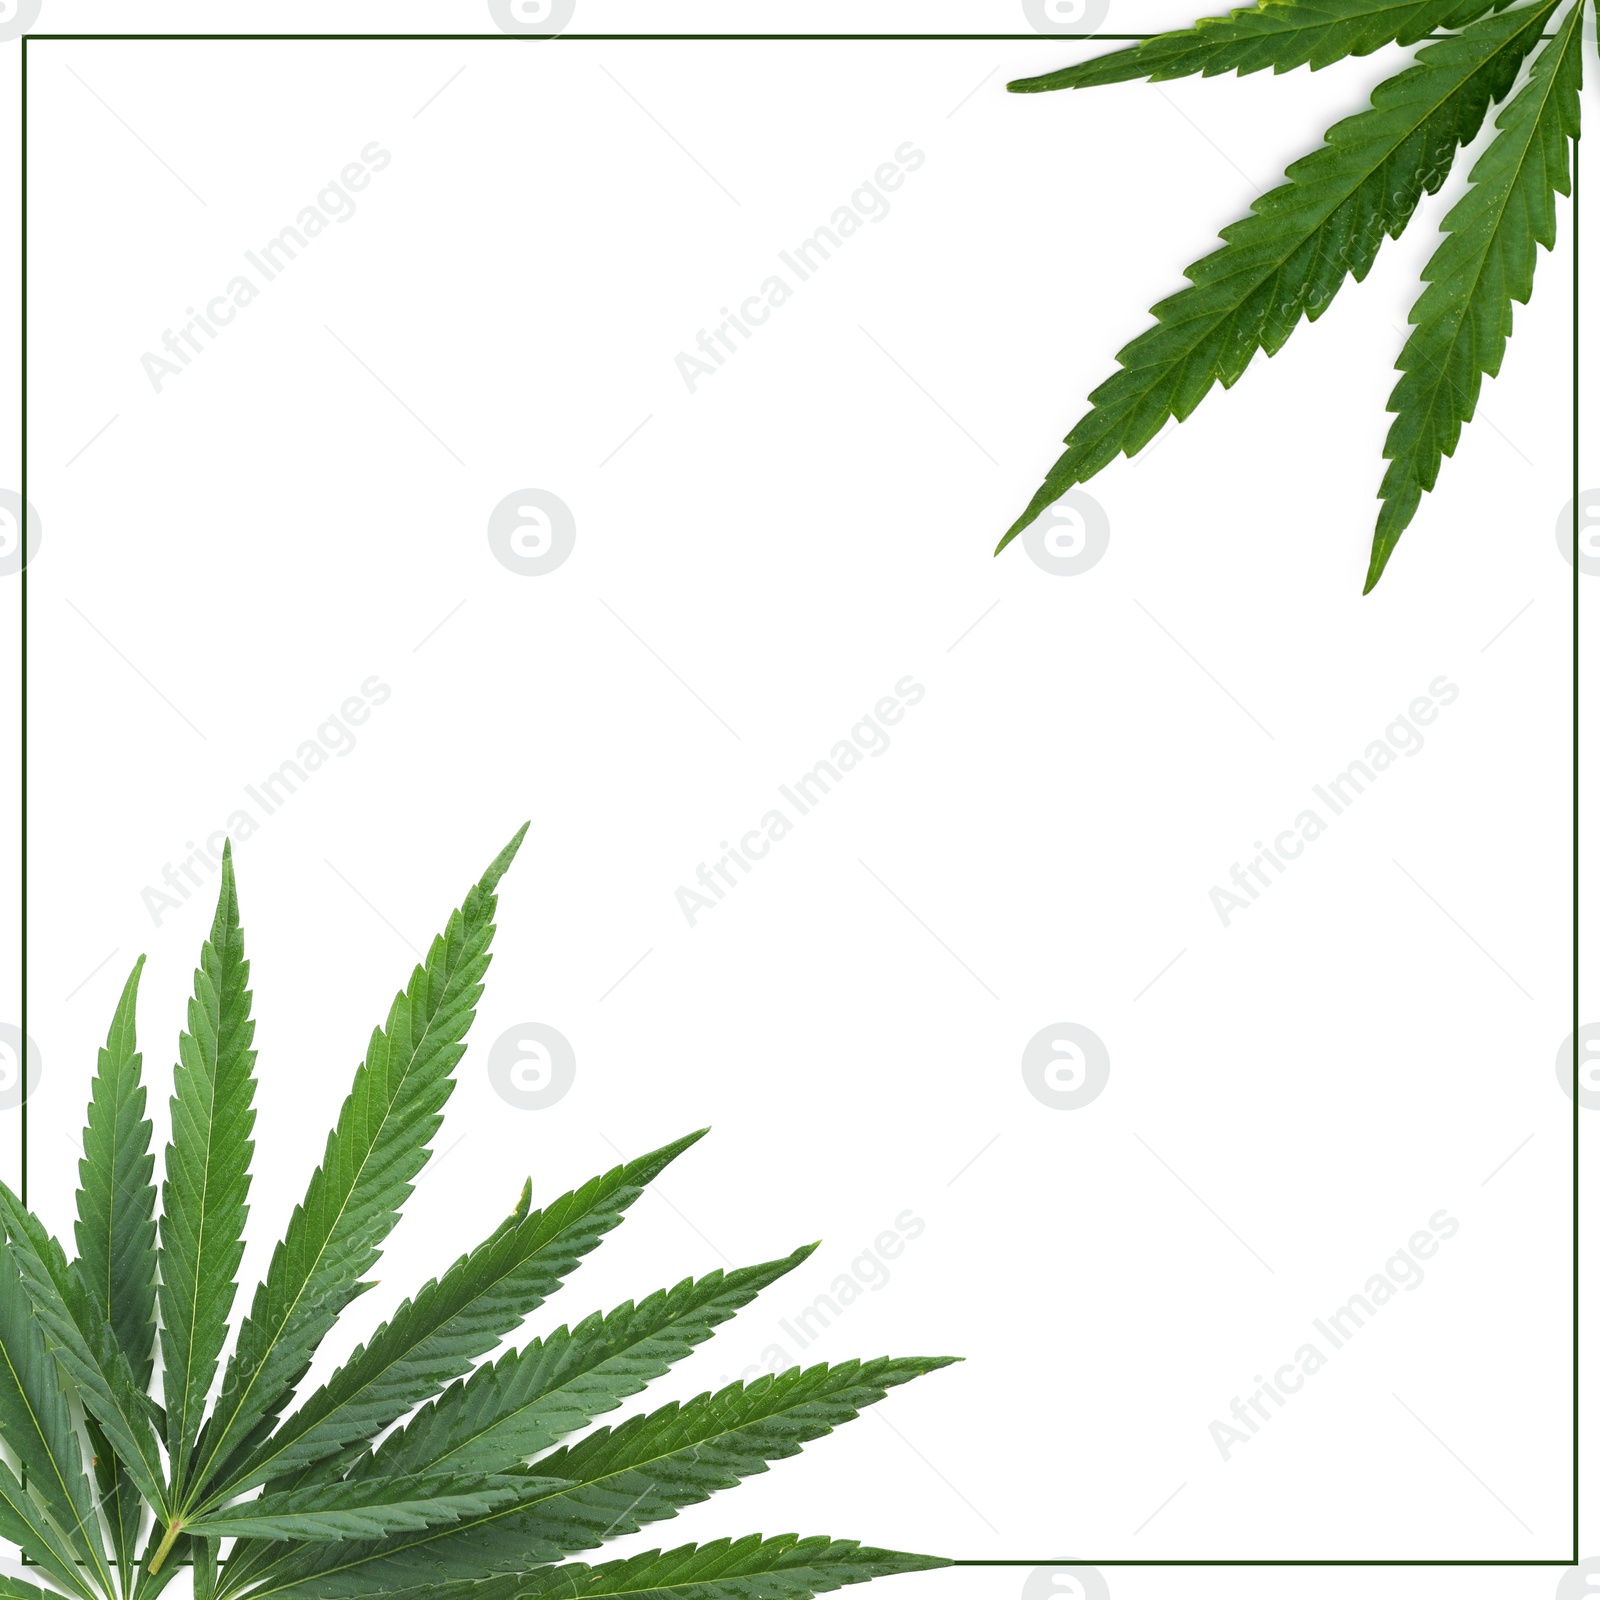 Image of Frame and hemp leaves on white background